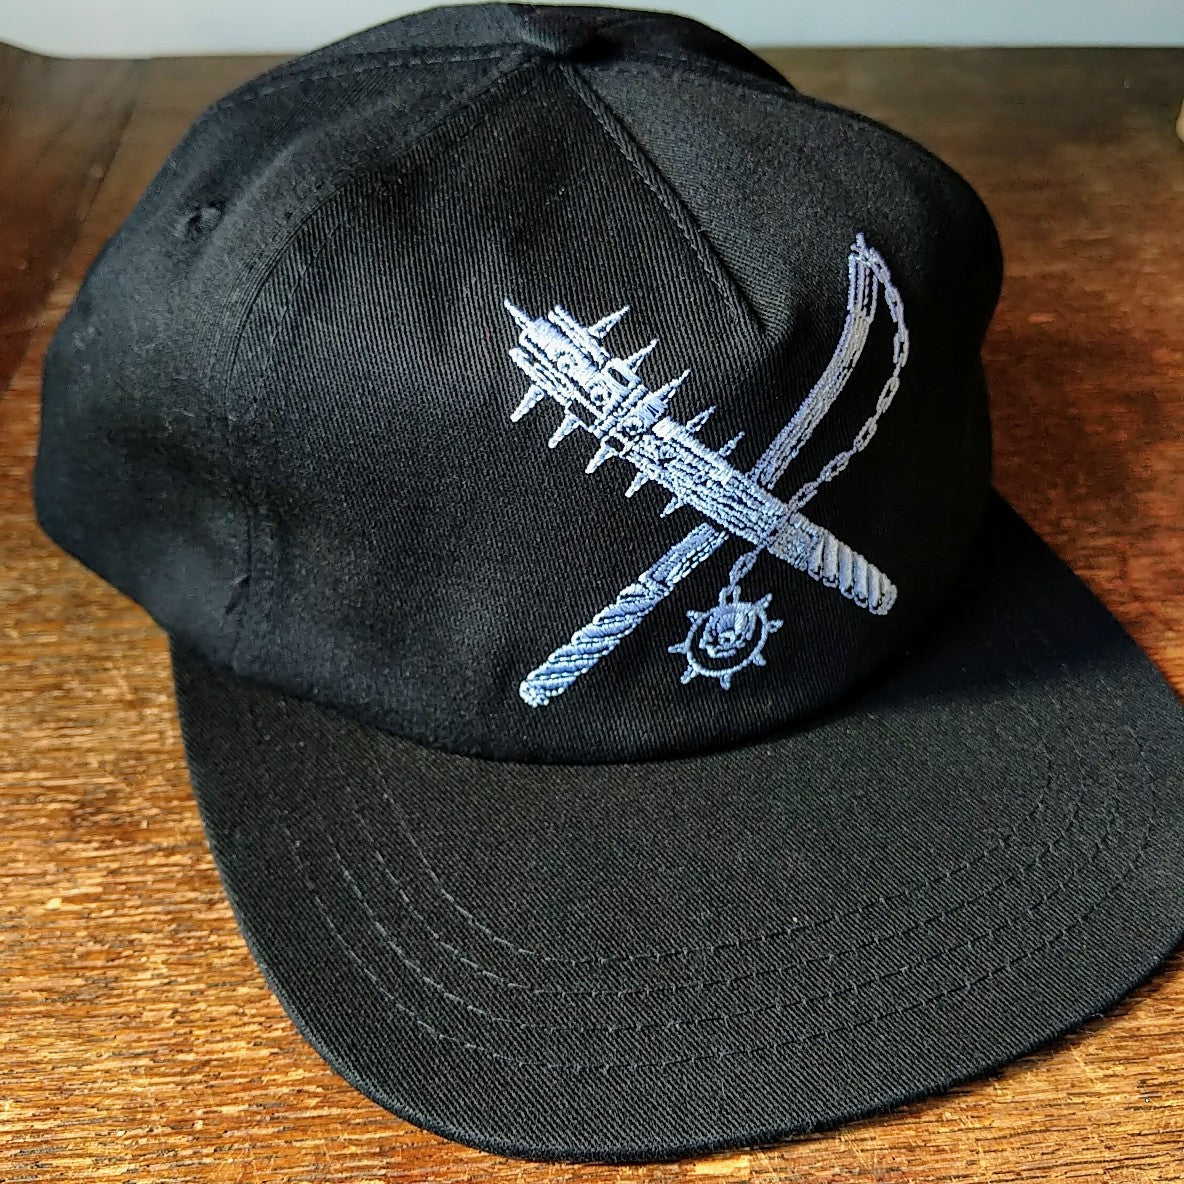 [SOLD OUT] OUT OF SEASON "Weapons" Snapback Hat (unstructured)